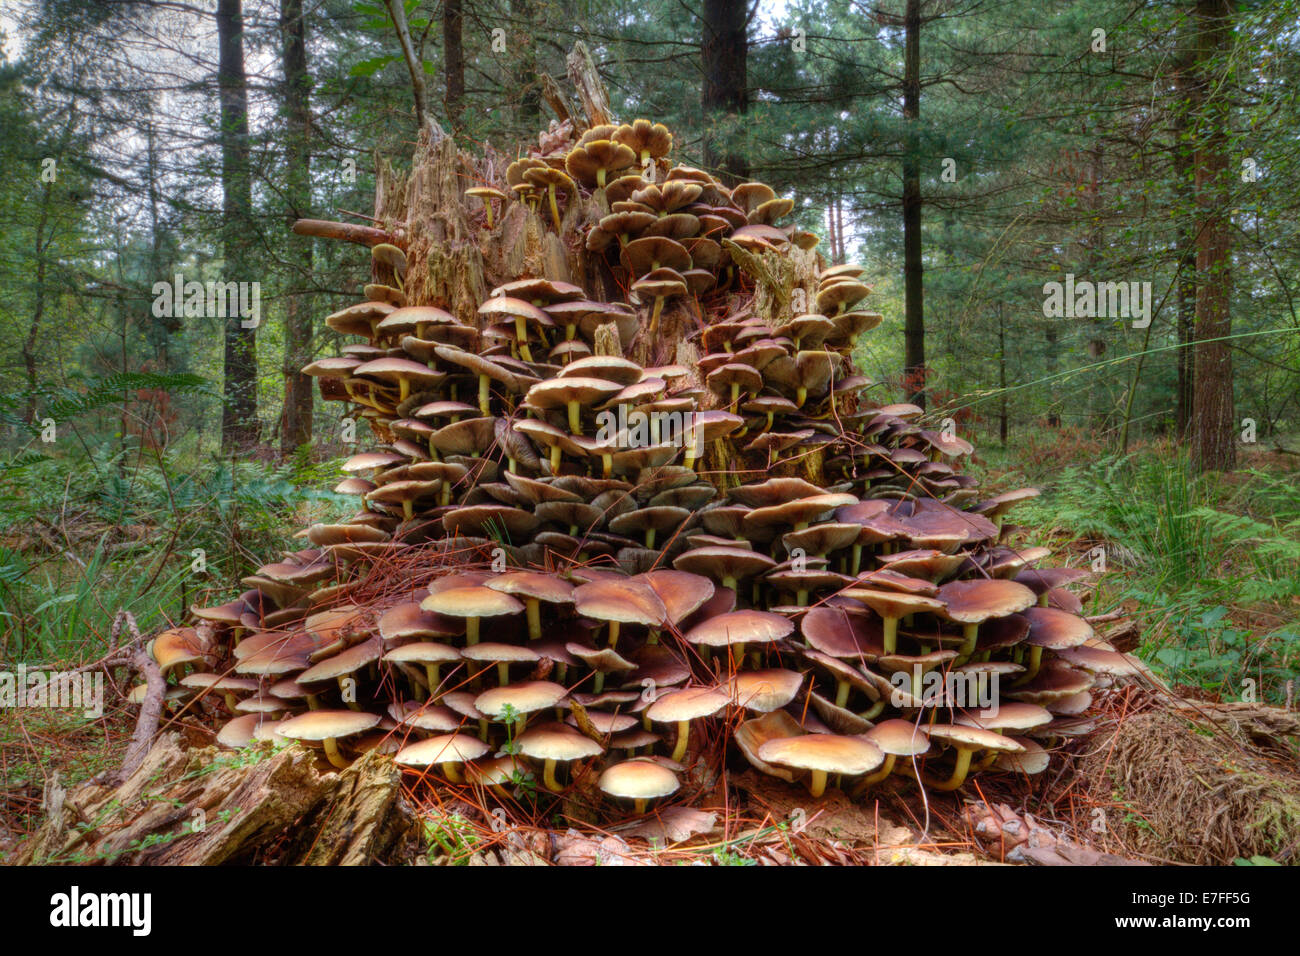 Lots of mushrooms (Sulphur tuft) growing on a rotting tree trunk in a forest. Stock Photo